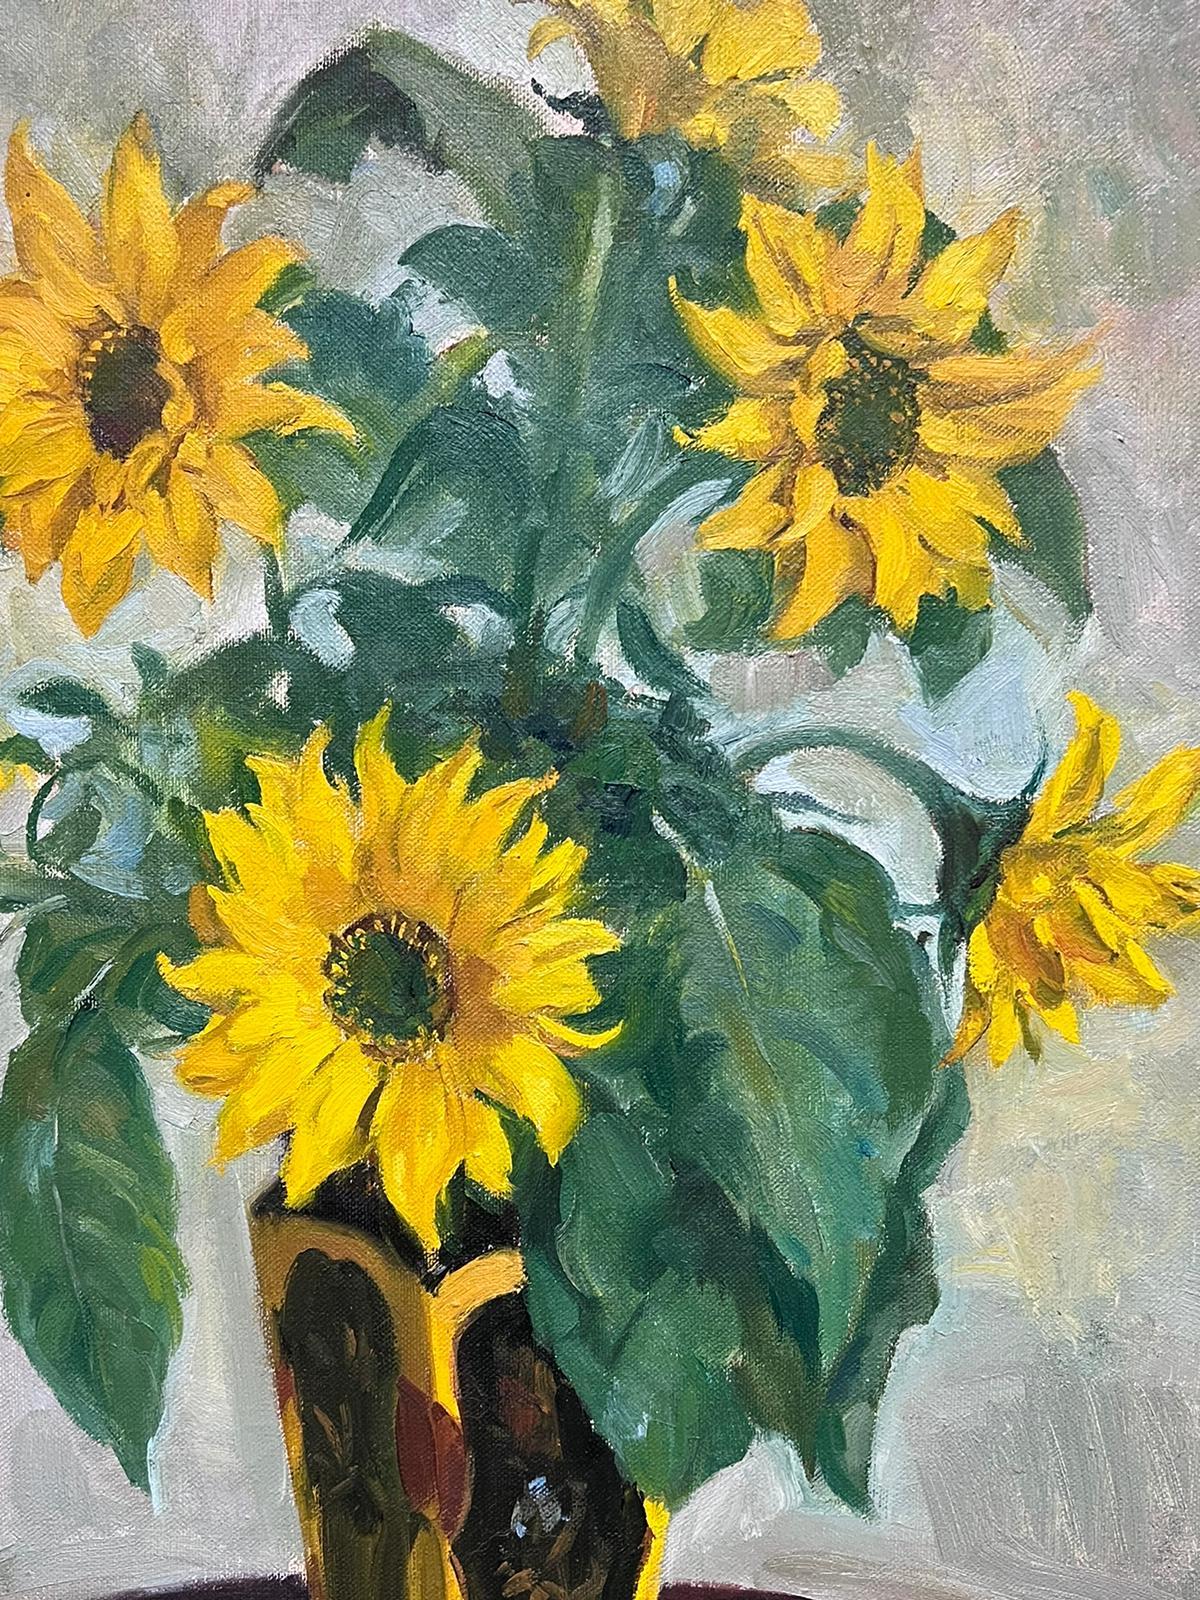 Sunflowers in Vase
English Impressionist artist, mid 20th century
indistinctly signed oil on canvas, framed
framed: 29 x 23.5 inches 
canvas: 24 x 18 inches
provenance: private collection
condition: a few minor indents and 'dings' to the canvas, but